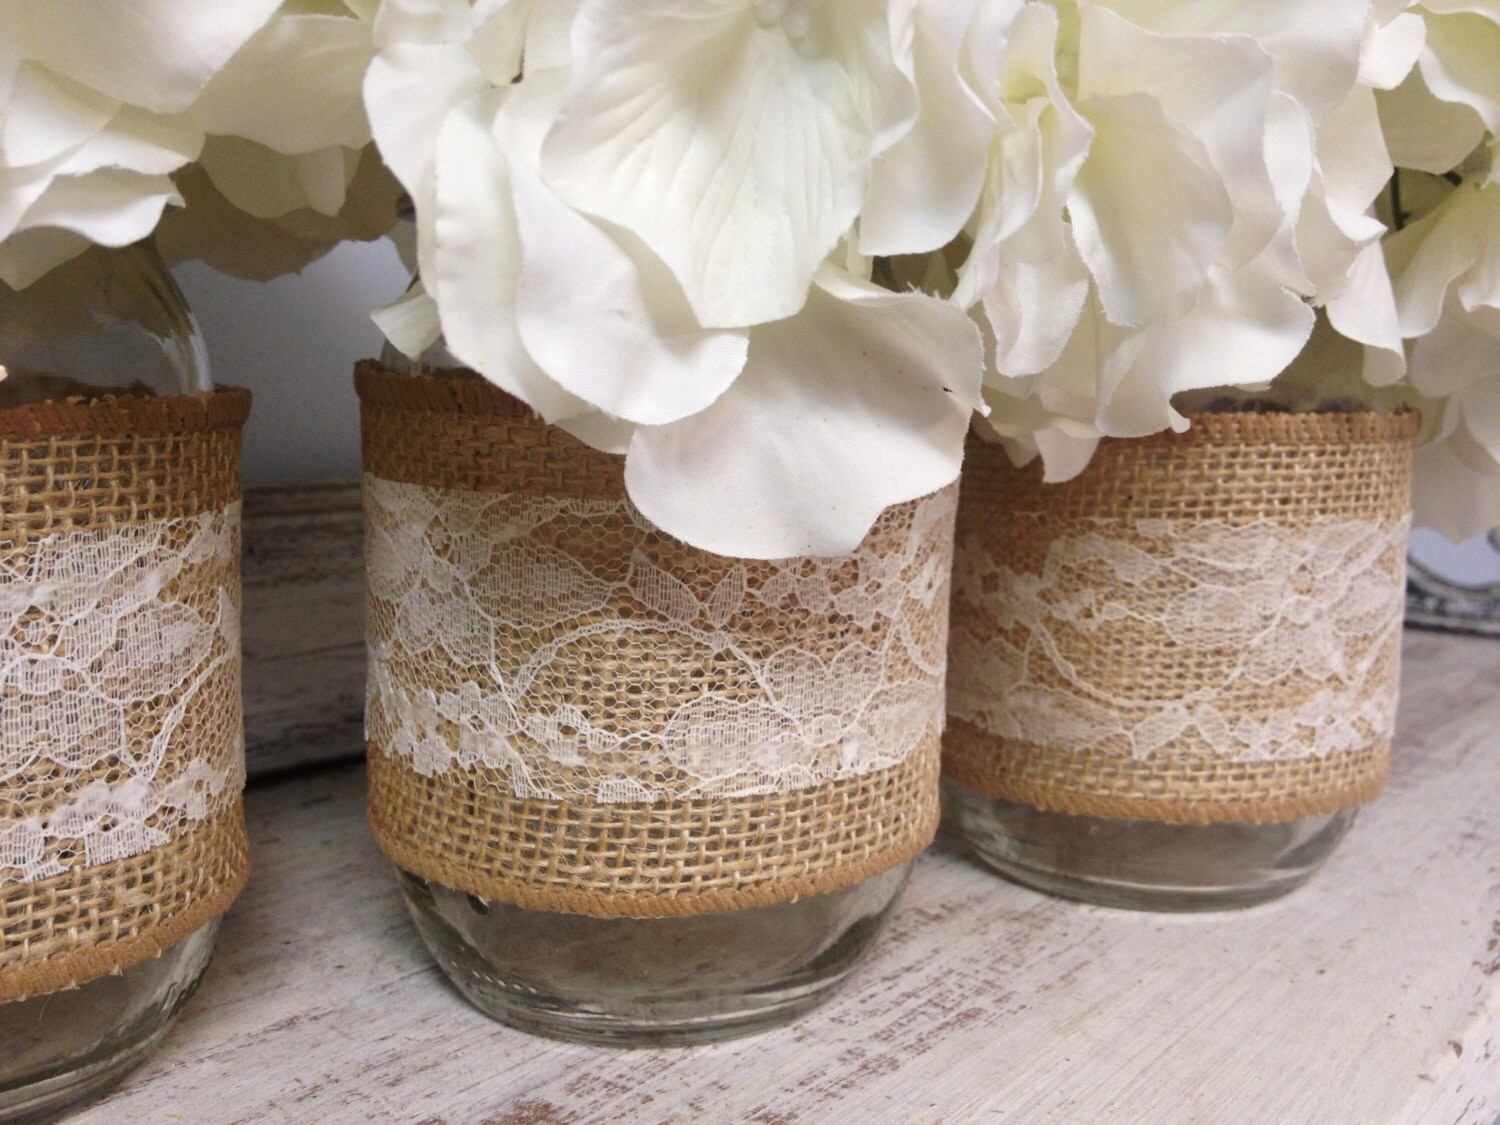 Set Of 3 Burlap And Lace Wrapped Mason Jars Perfect For